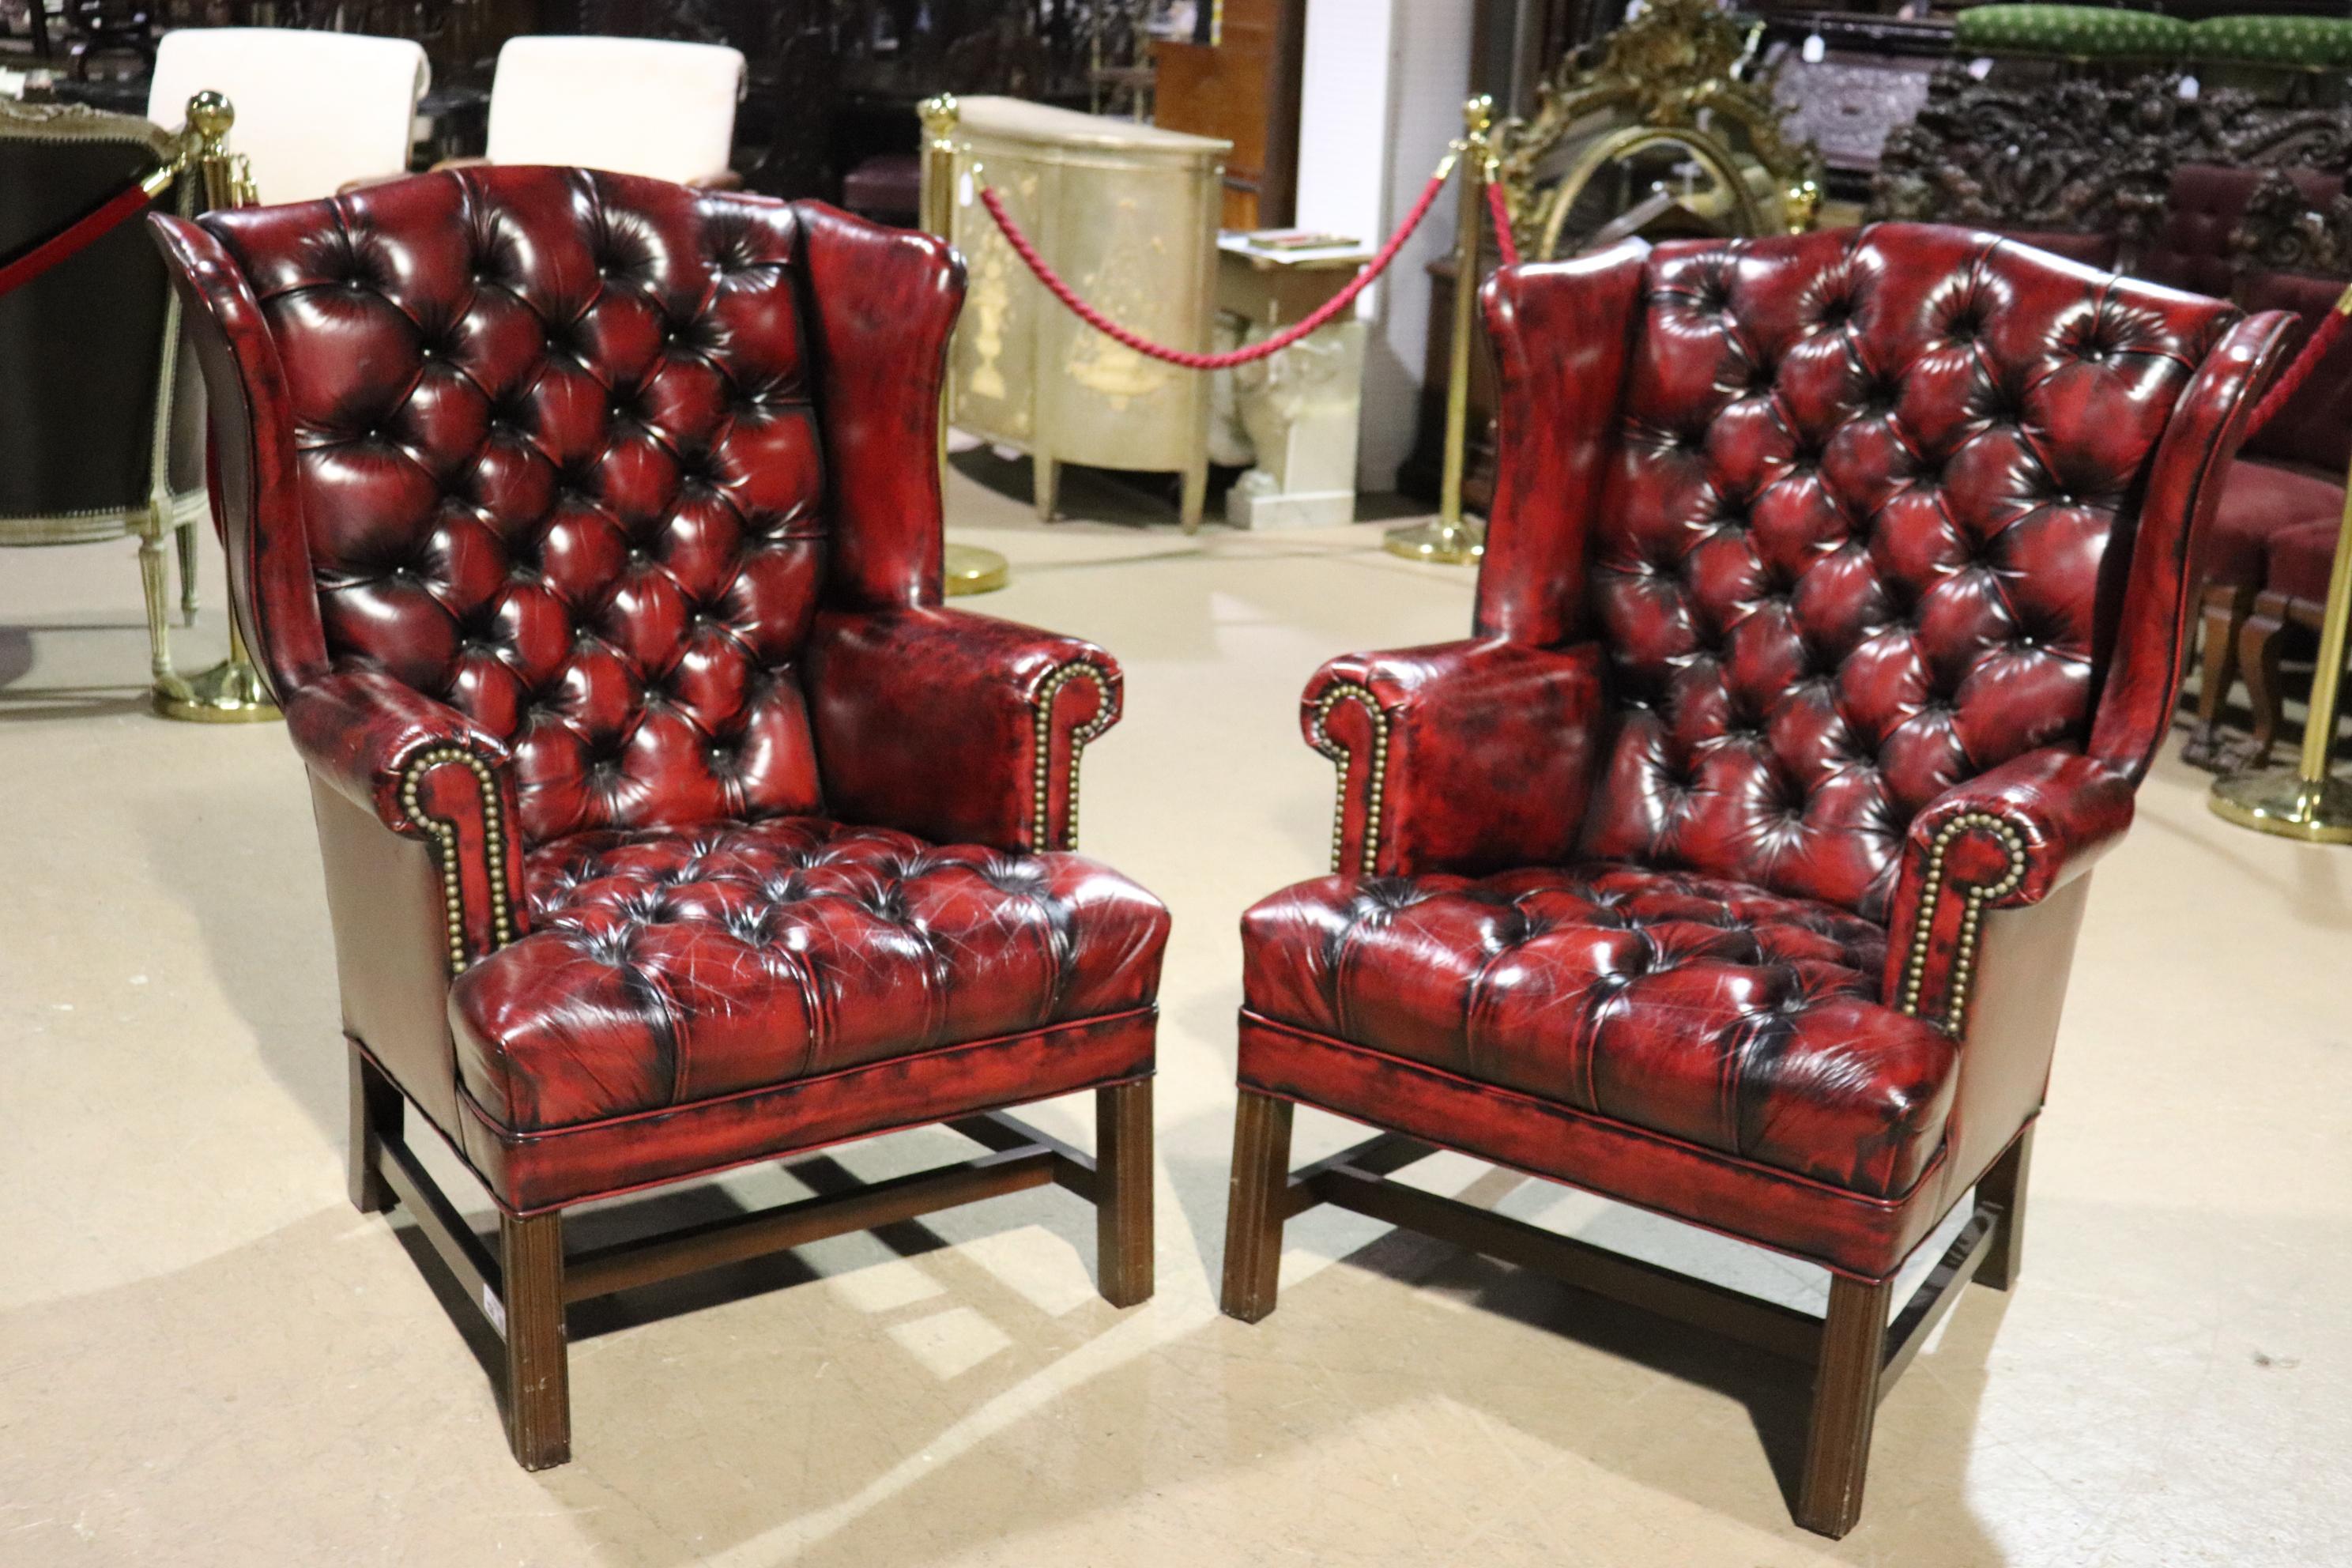 This is an absolutely gorgeous genuine top-grain oxblood leather wing chairs. Perfect for an office or any handsome livingroom setting, these vintage 1970s era solid mahogany framed wing chairs are in very good condition with no major signs of age